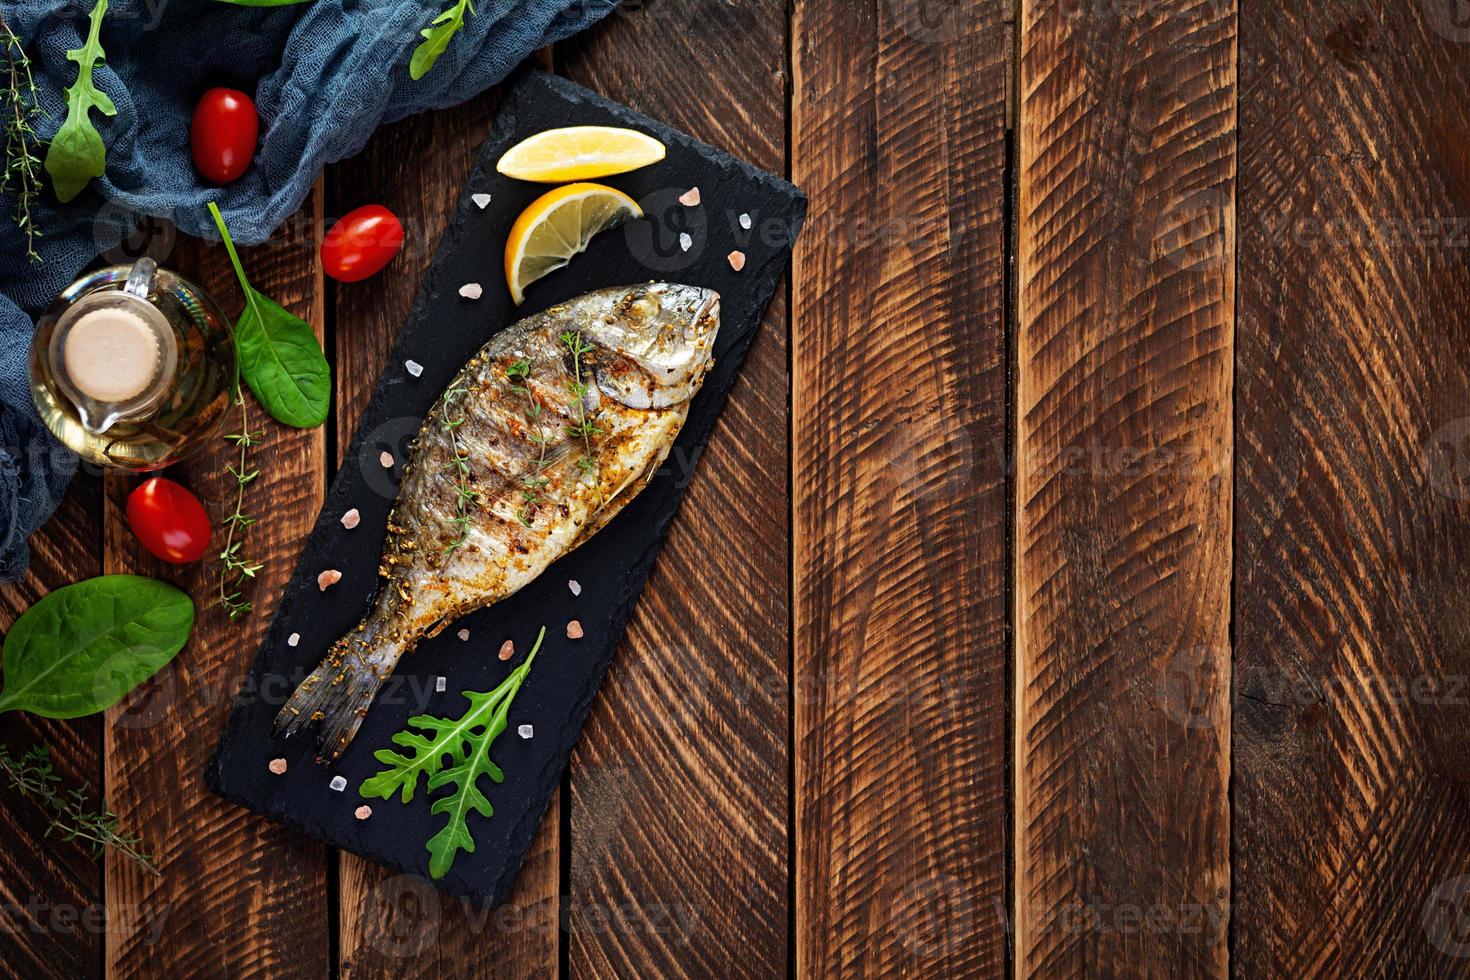 Grilled dorado fish on wooden background. Roasted seafish with spice and herbs photo